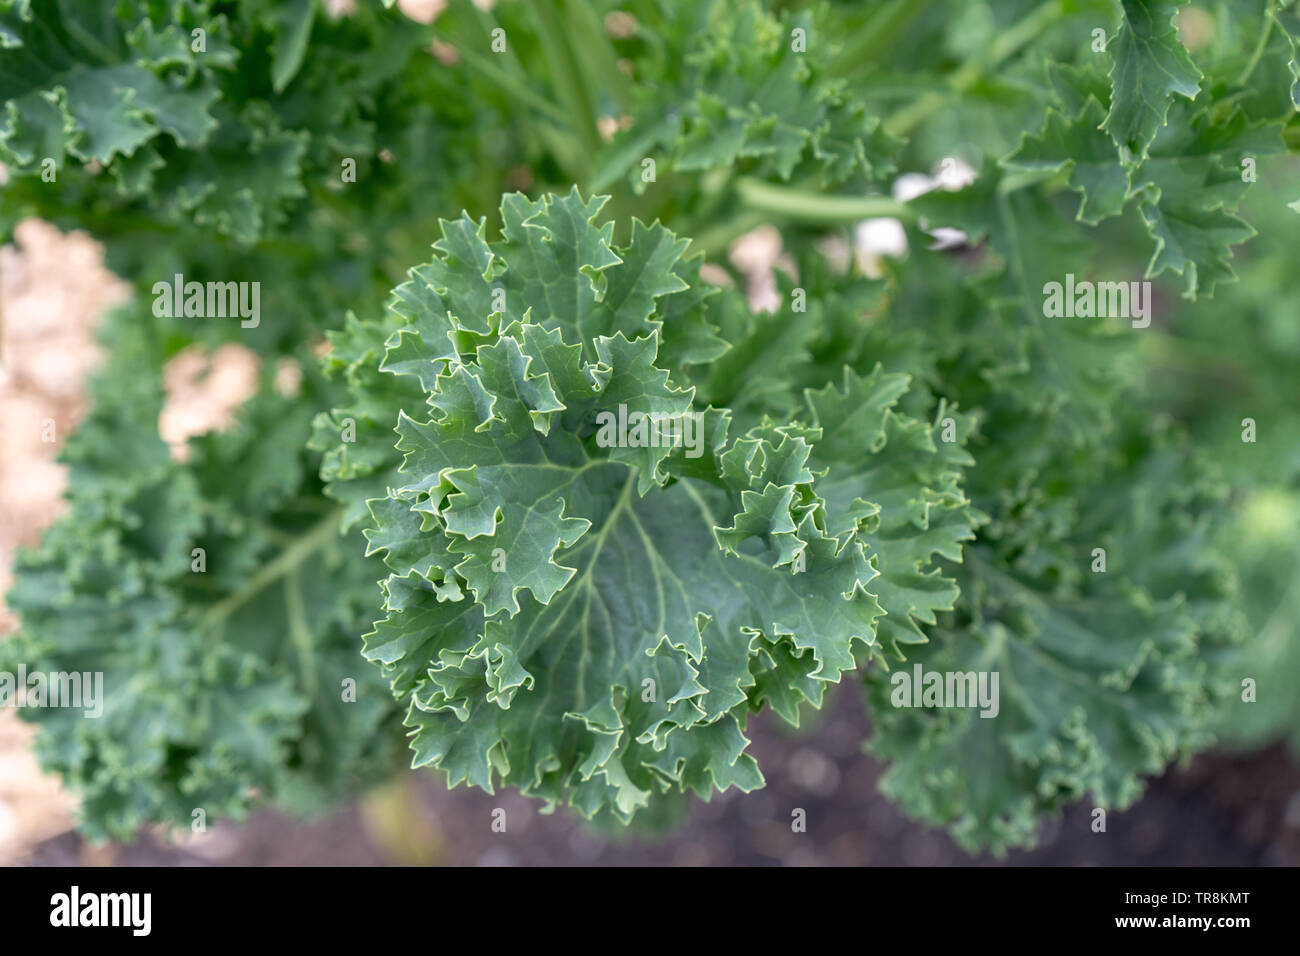 Edible kale leaves while flowering, changing their shape. Kale flowers not showing. These are the transformed, bitter leaves growing on bolting kale. Stock Photo